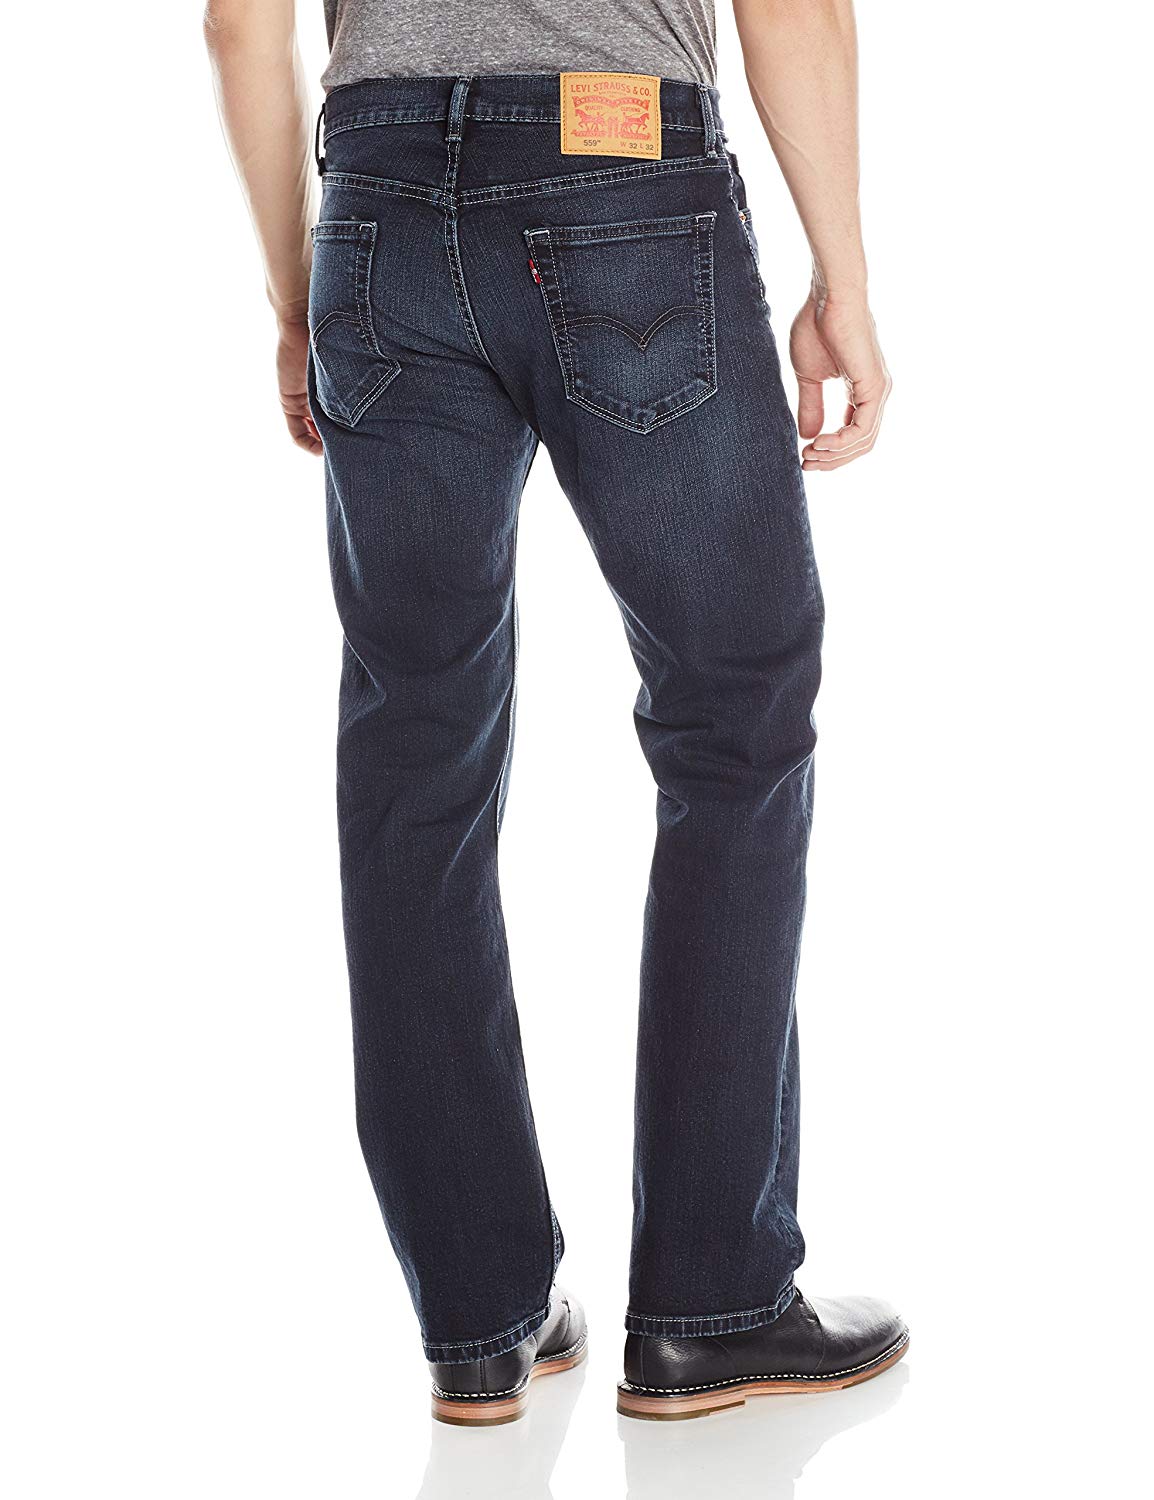 Levi's Men's 559 Relaxed Straight Fit Jean - 33W x 30L -, Blue, Size ...